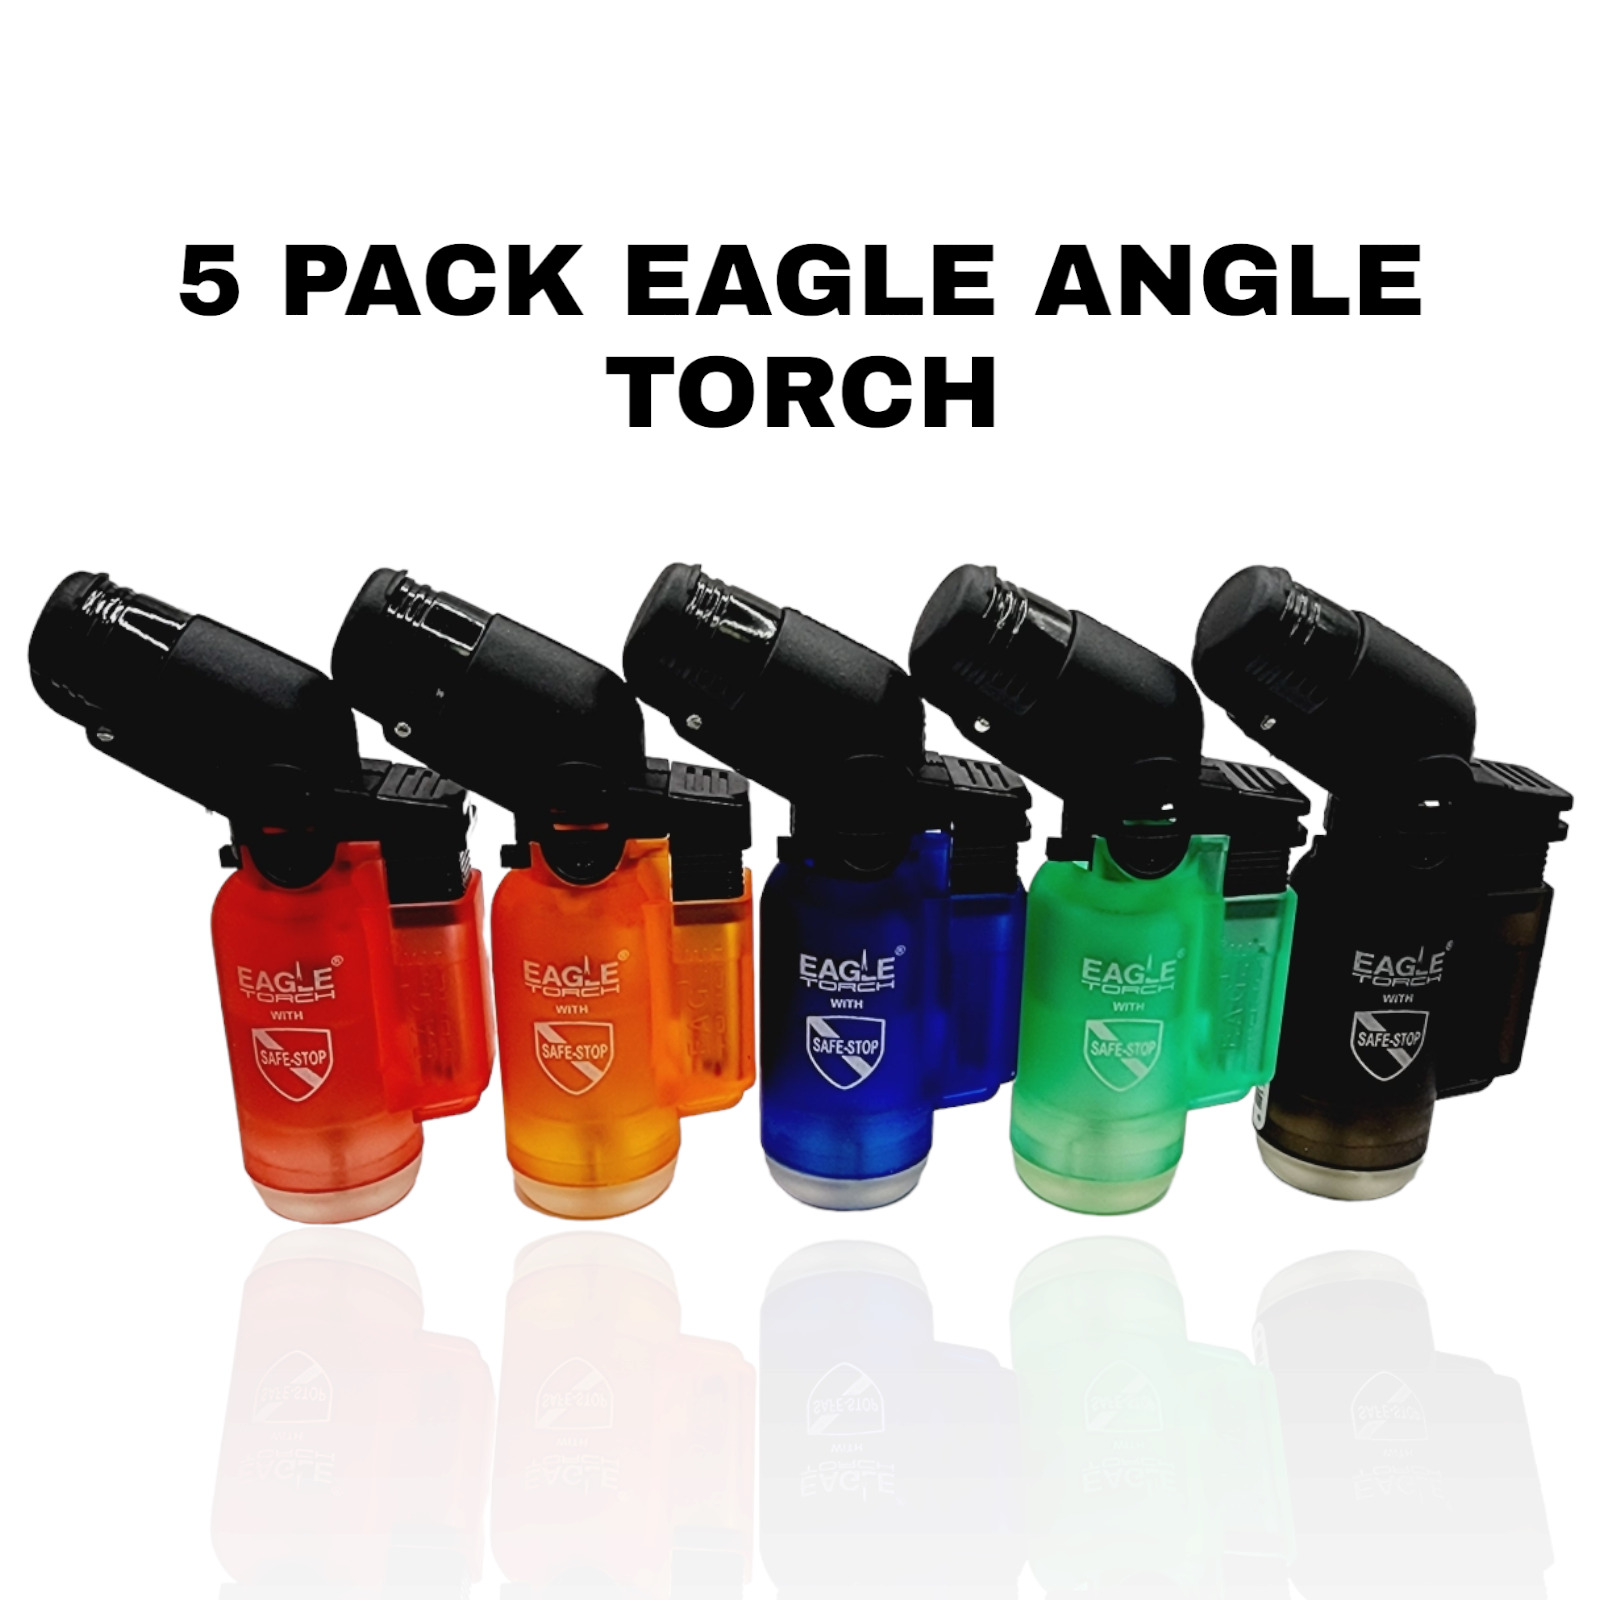 Eagle Torch Mini-Angle Torch Lighter Windproof Refillable Lighter 5-Count 